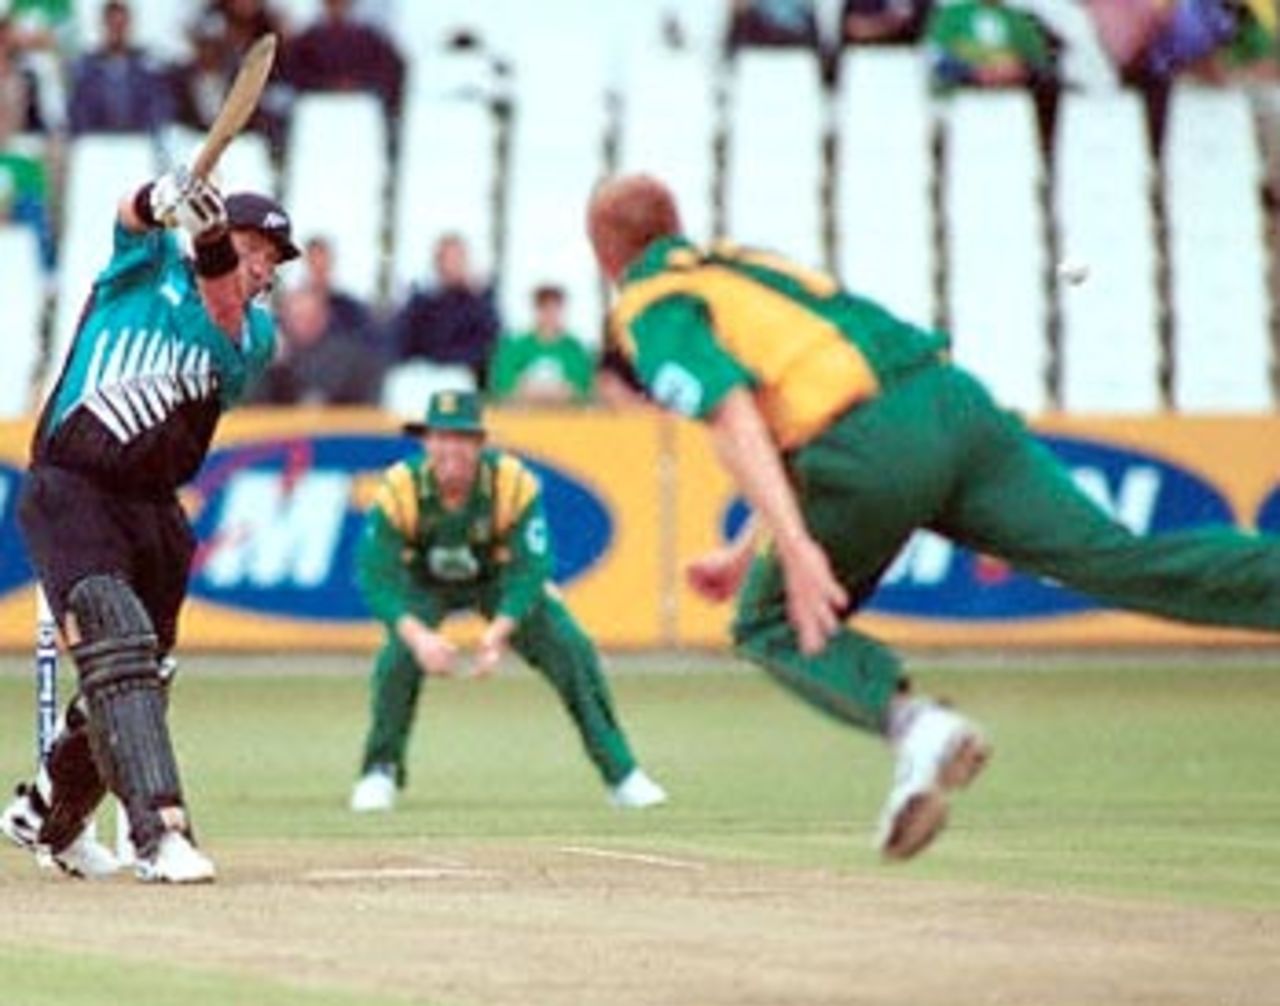 New Zealand batsman Roger Twose drives a delivery from South African bowler Sean Pollock at Durban's Kingsmead Cricket grounds, 01 November 2000 during the fifth one day series between the two countries.